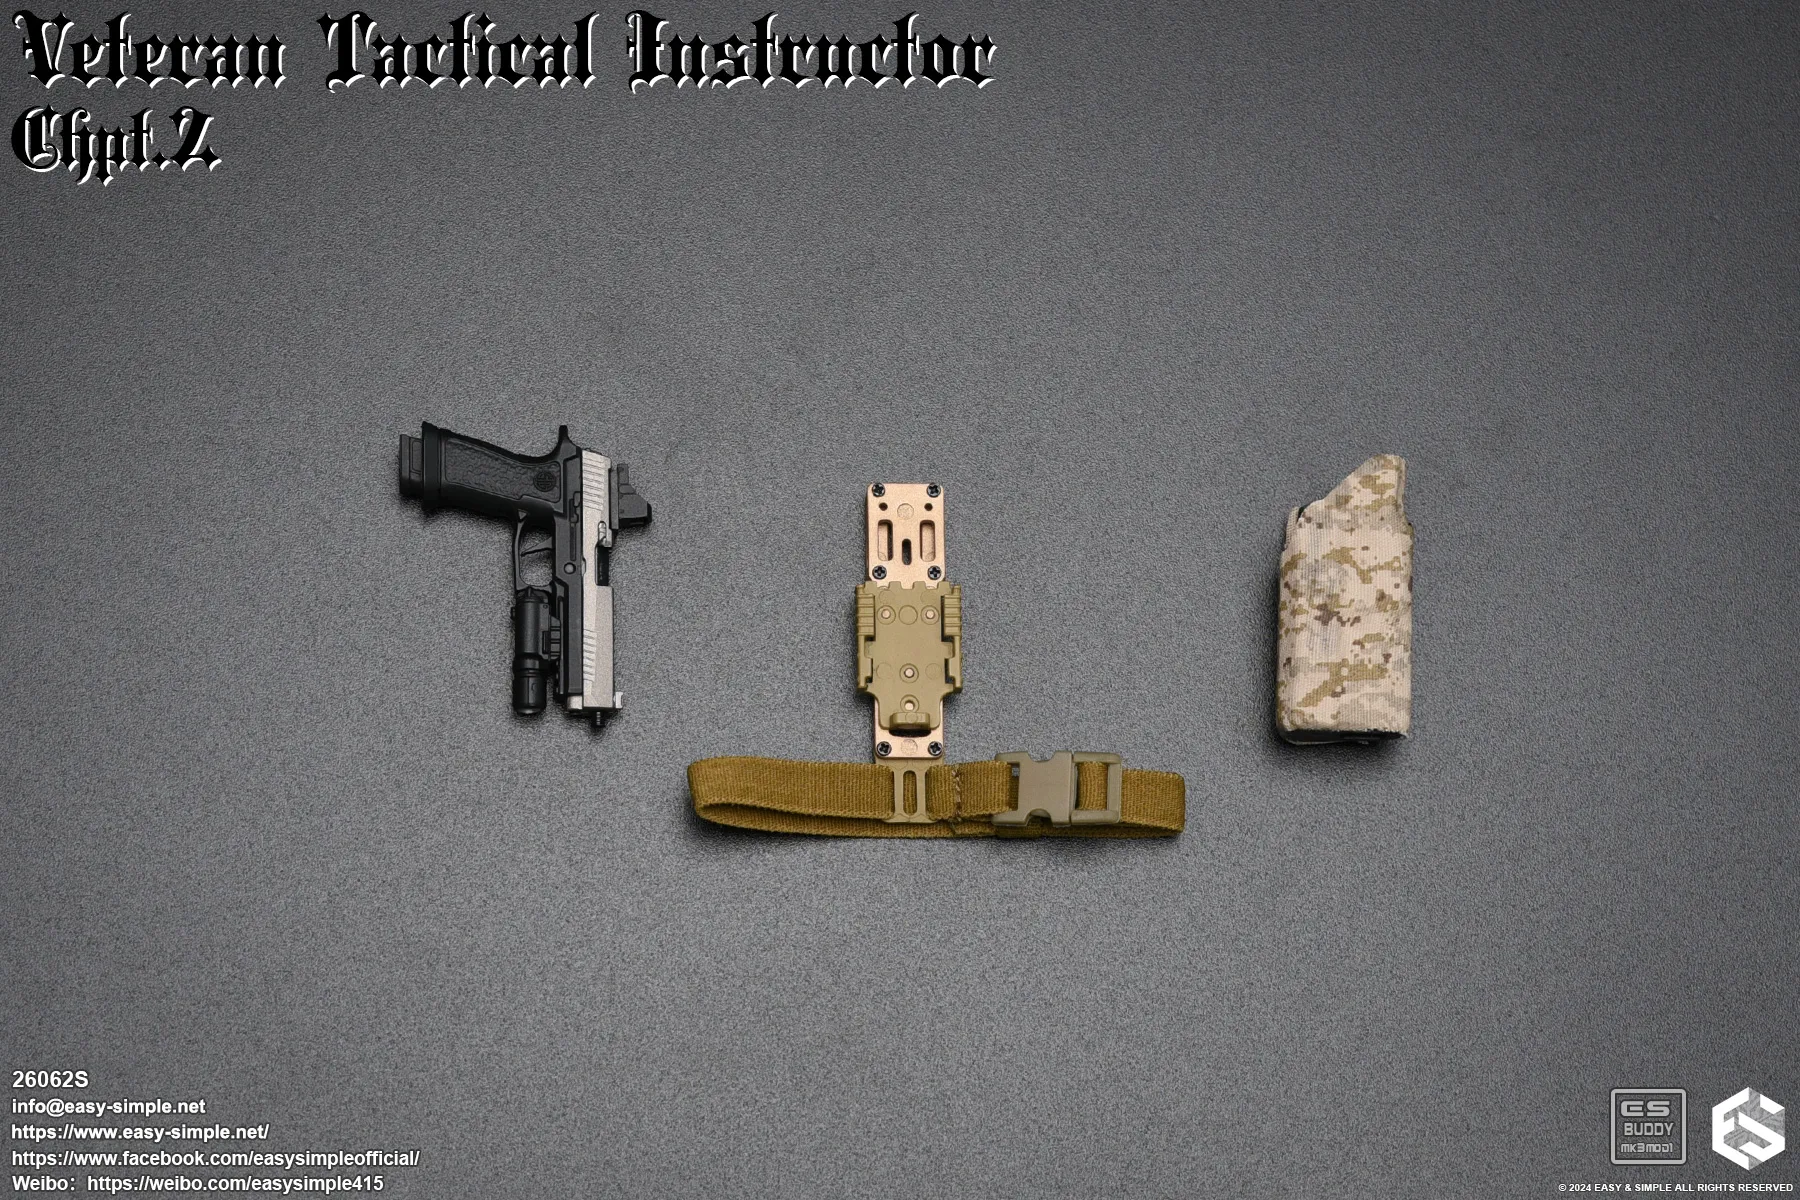 military - NEW PRODUCT: Easy & Simple Veteran Tactical Instructor Chapter II 26062S Format,webp